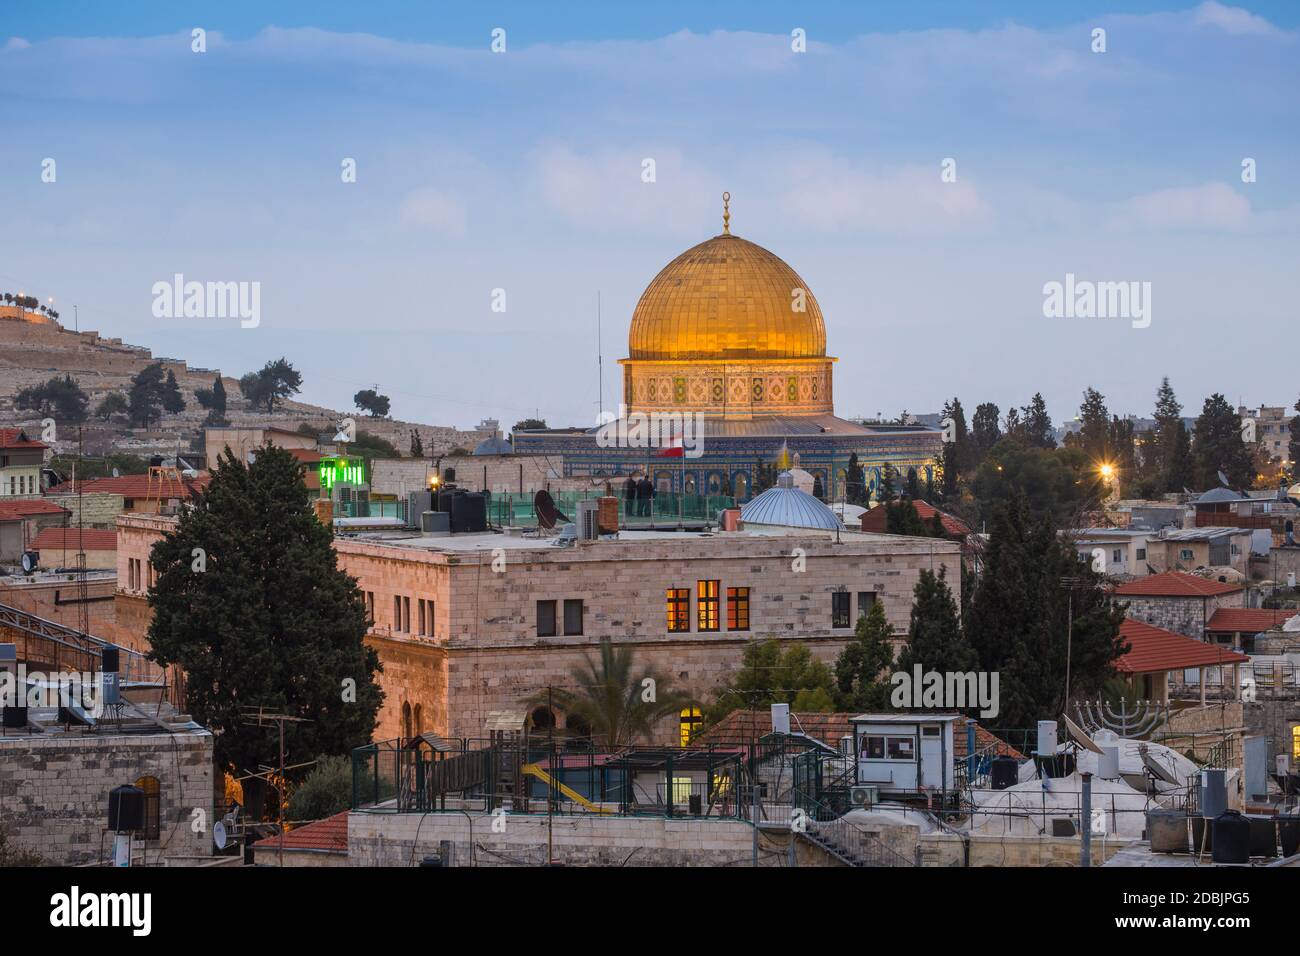 Israel, Jerusalem, View over Muslem Quarter towards Dome of the Rock Stock Photo